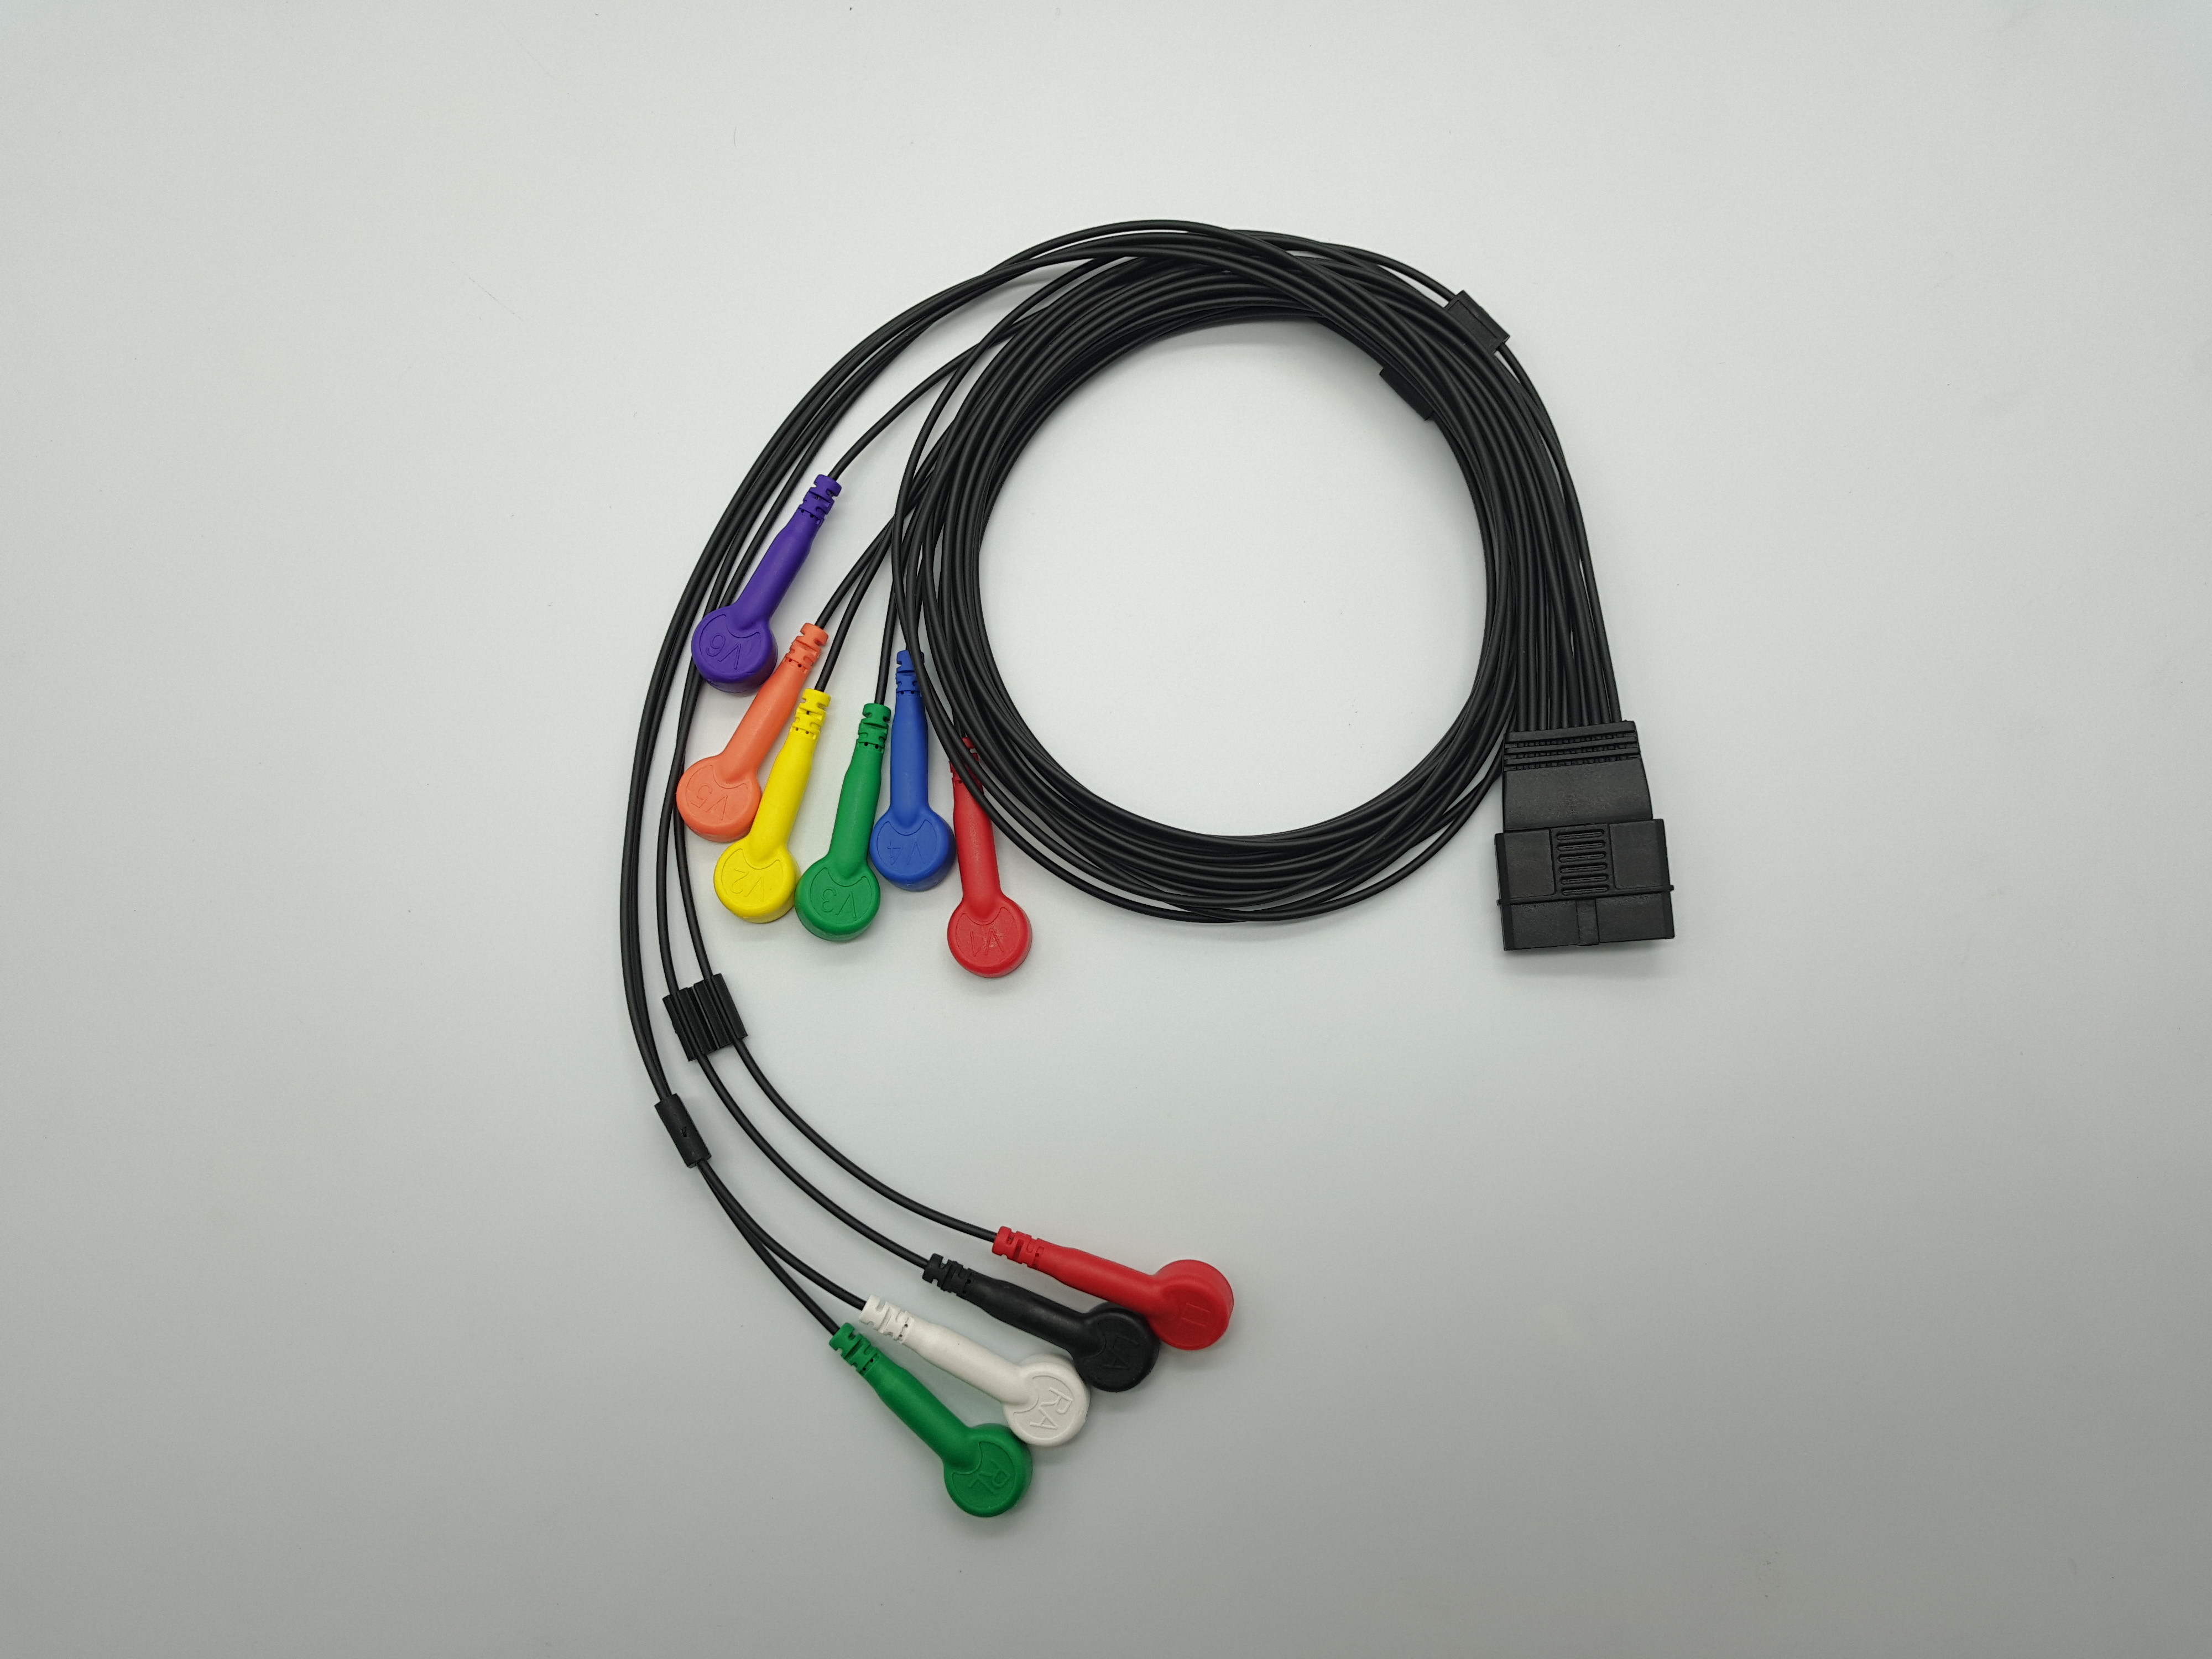 TPU 10 Lead IEC AHA Snap ECG Cable 1m For Schiller MS-12